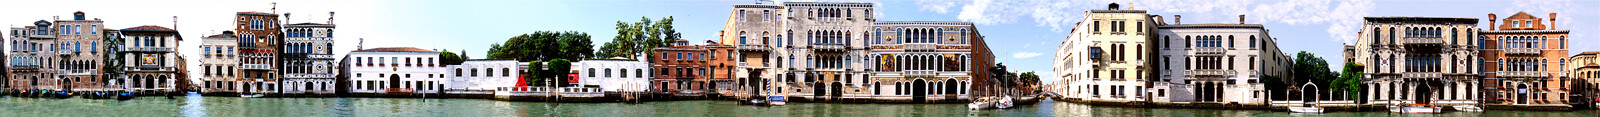 Grand Canal, Accademia, Venice, Italy - Larry Yust